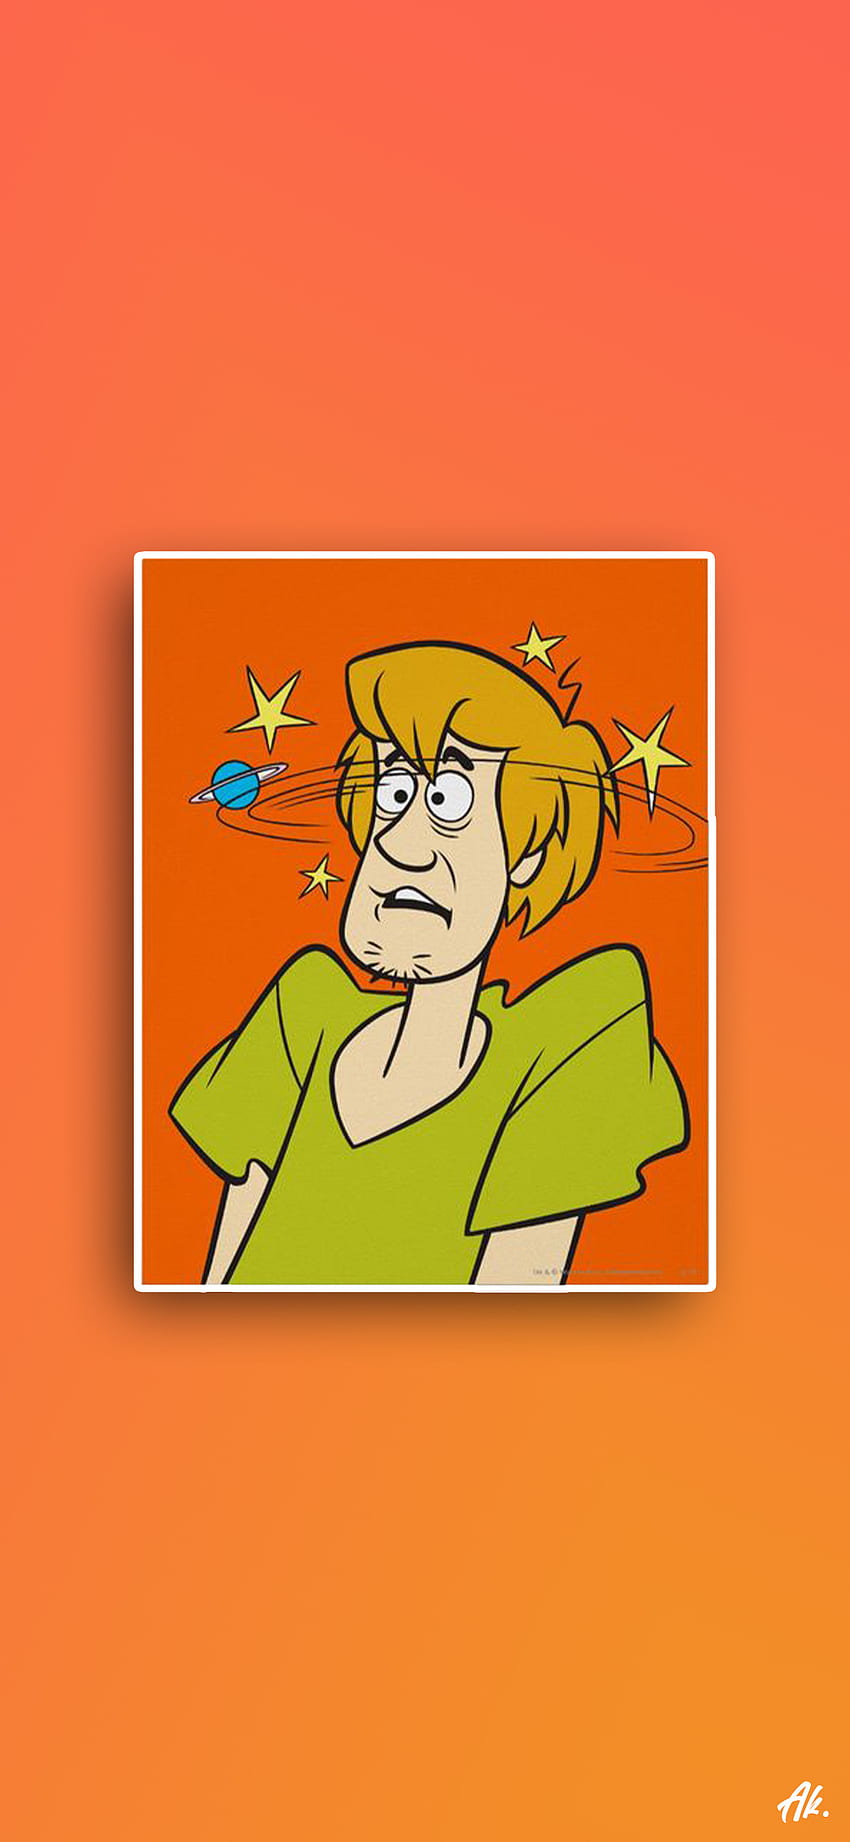 Shaggy Rogers and Scooby Doo  Disney wallpaper Shaggy and scooby Cartoon  character pictures